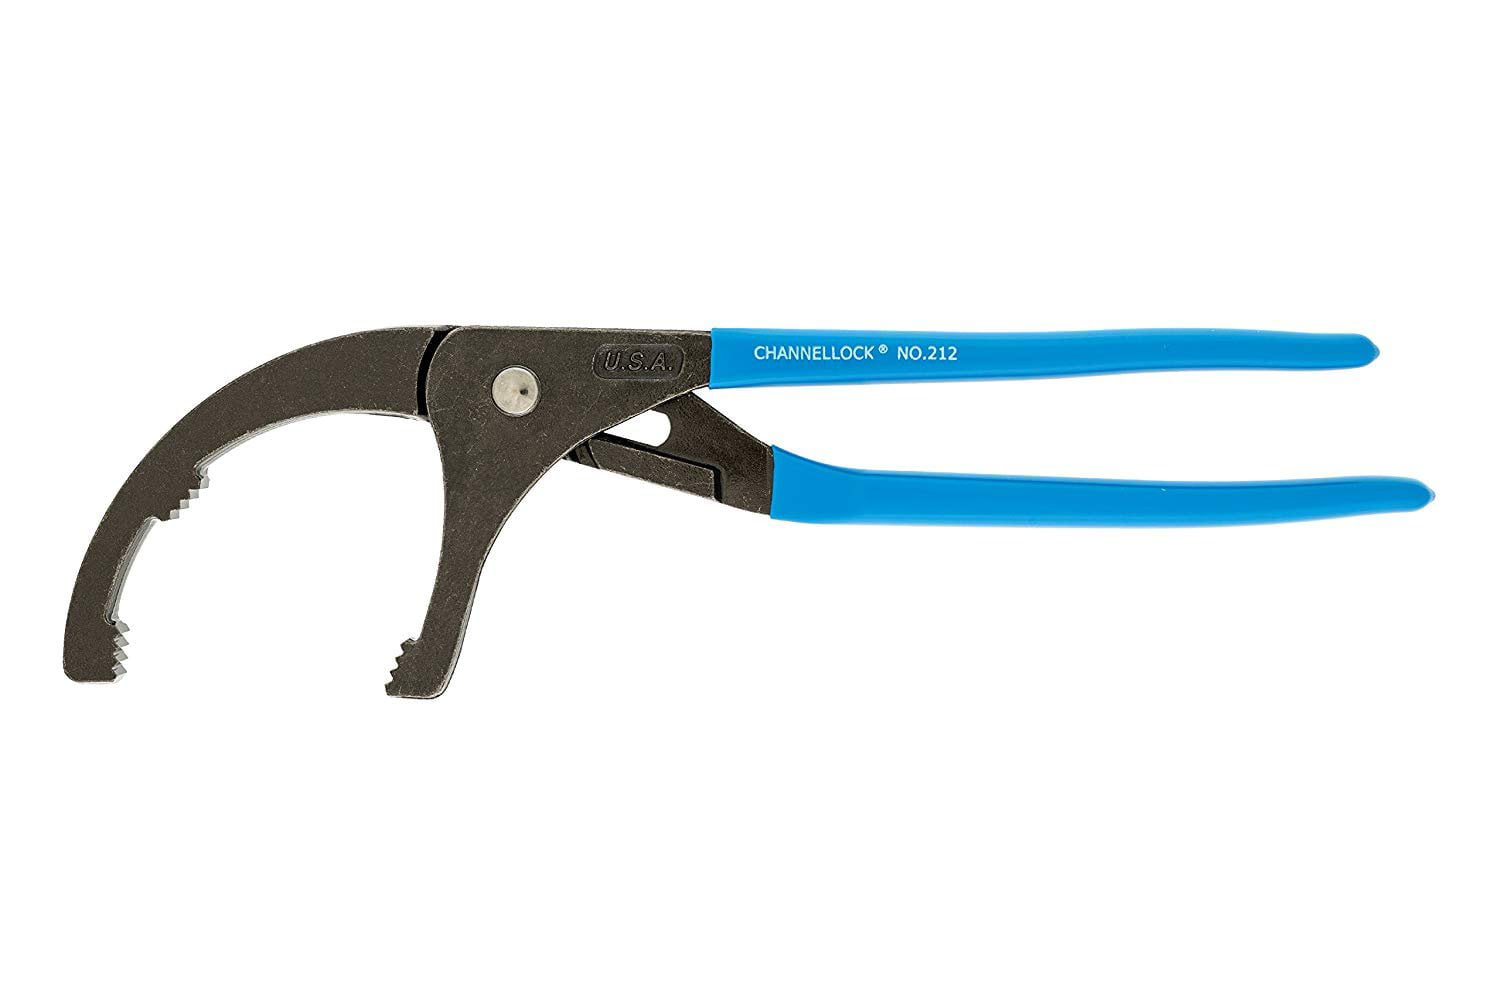 Channellock 212 Oil Filter Wrench Plier for sale online 